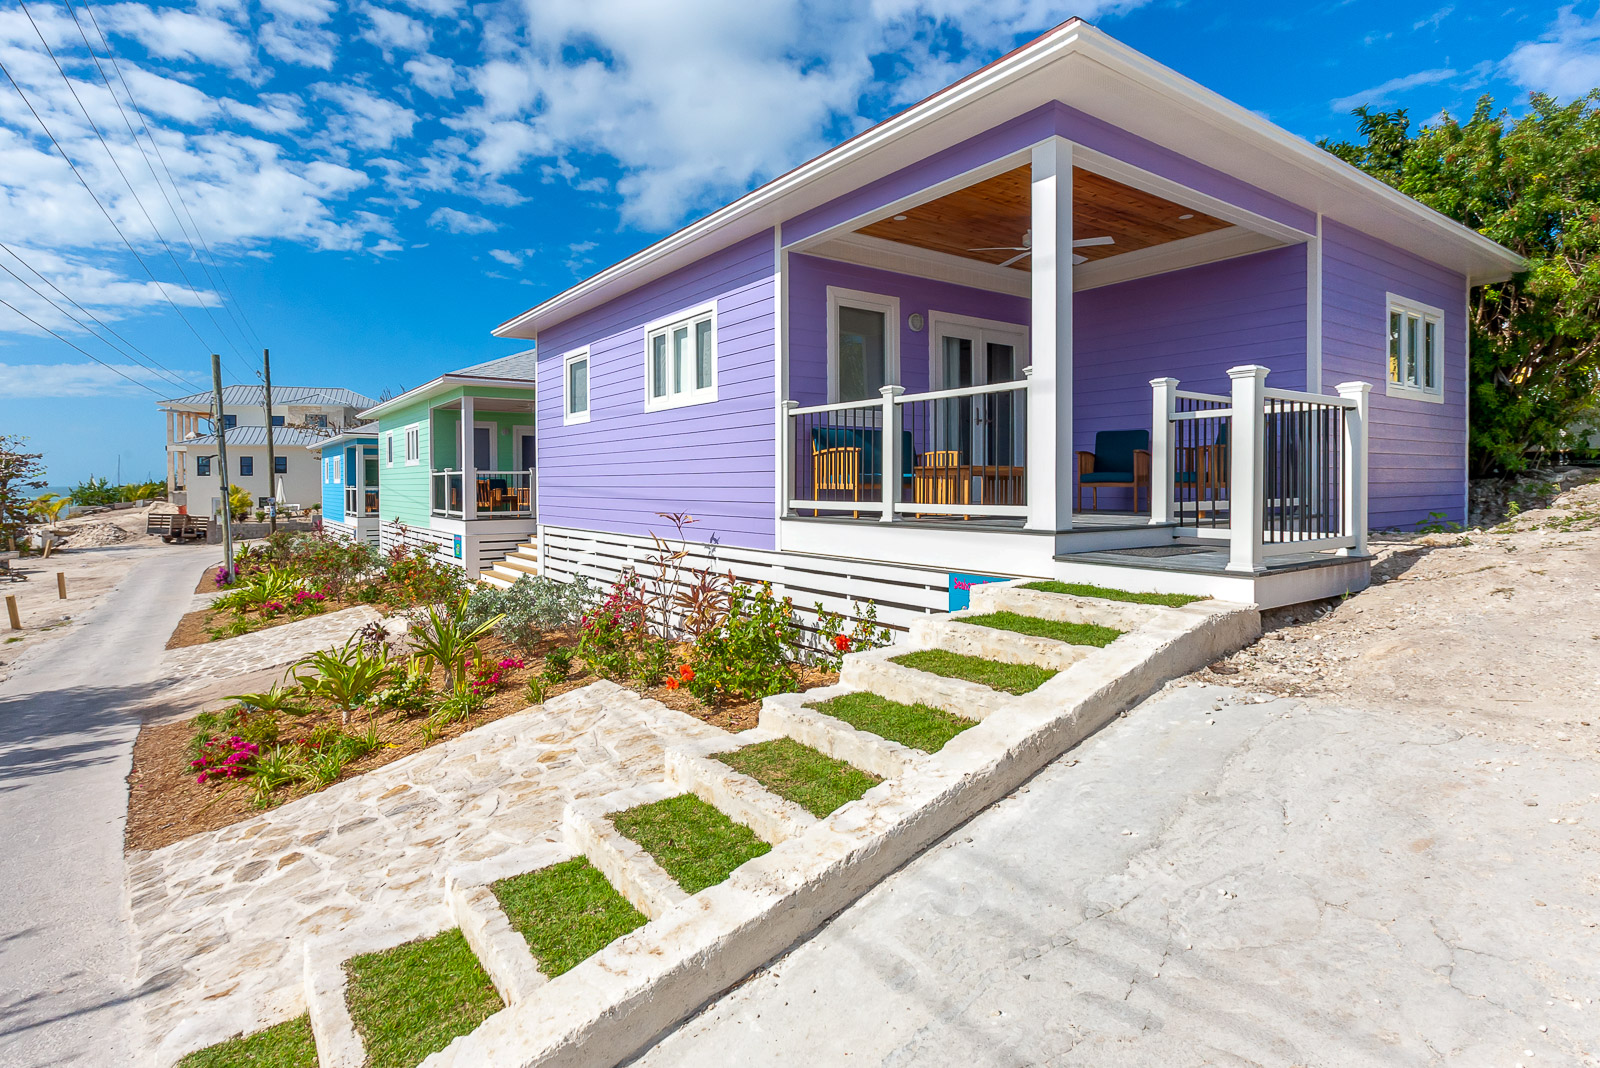 Seahorse Hideaway Vacation Rental on Great Guana Cay